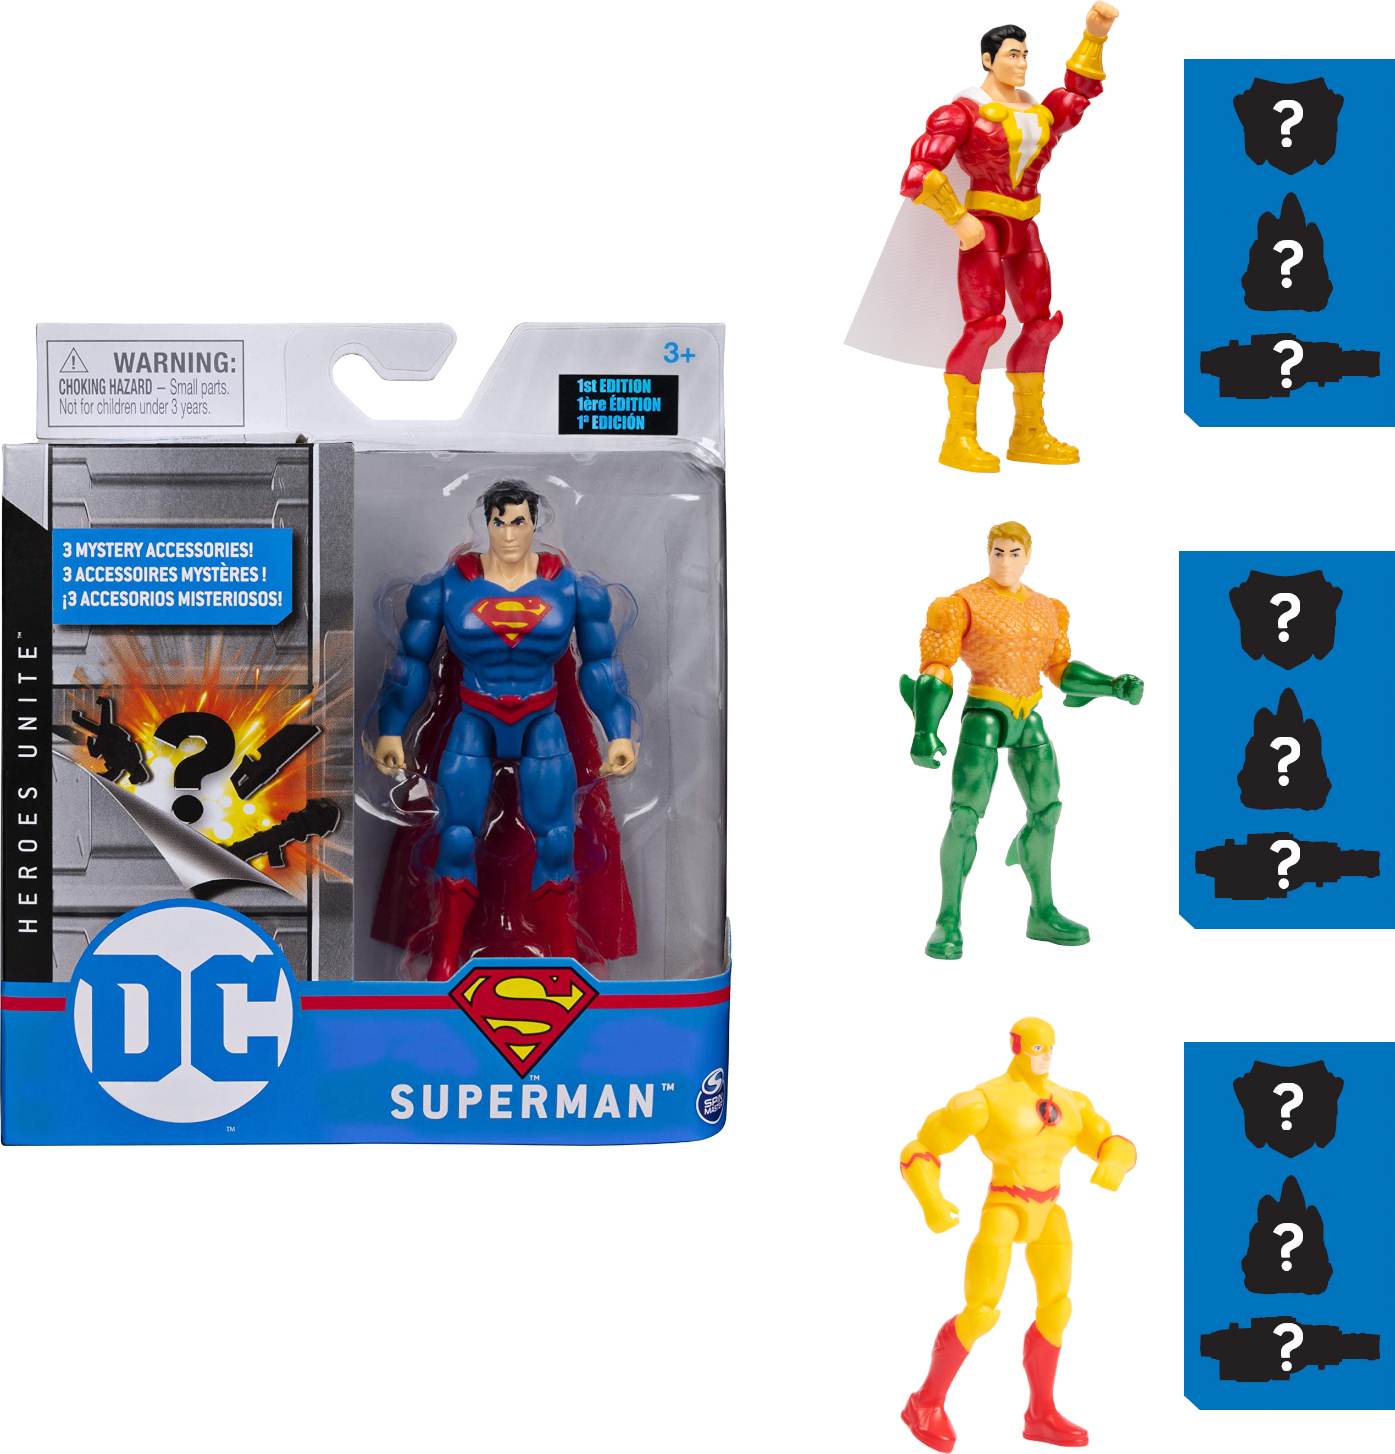 DC Comics, 4-Inch SUPERMAN Action Figure with 3 Mystery Accessories,  Adventure 1 - Givens Books and Little Dickens